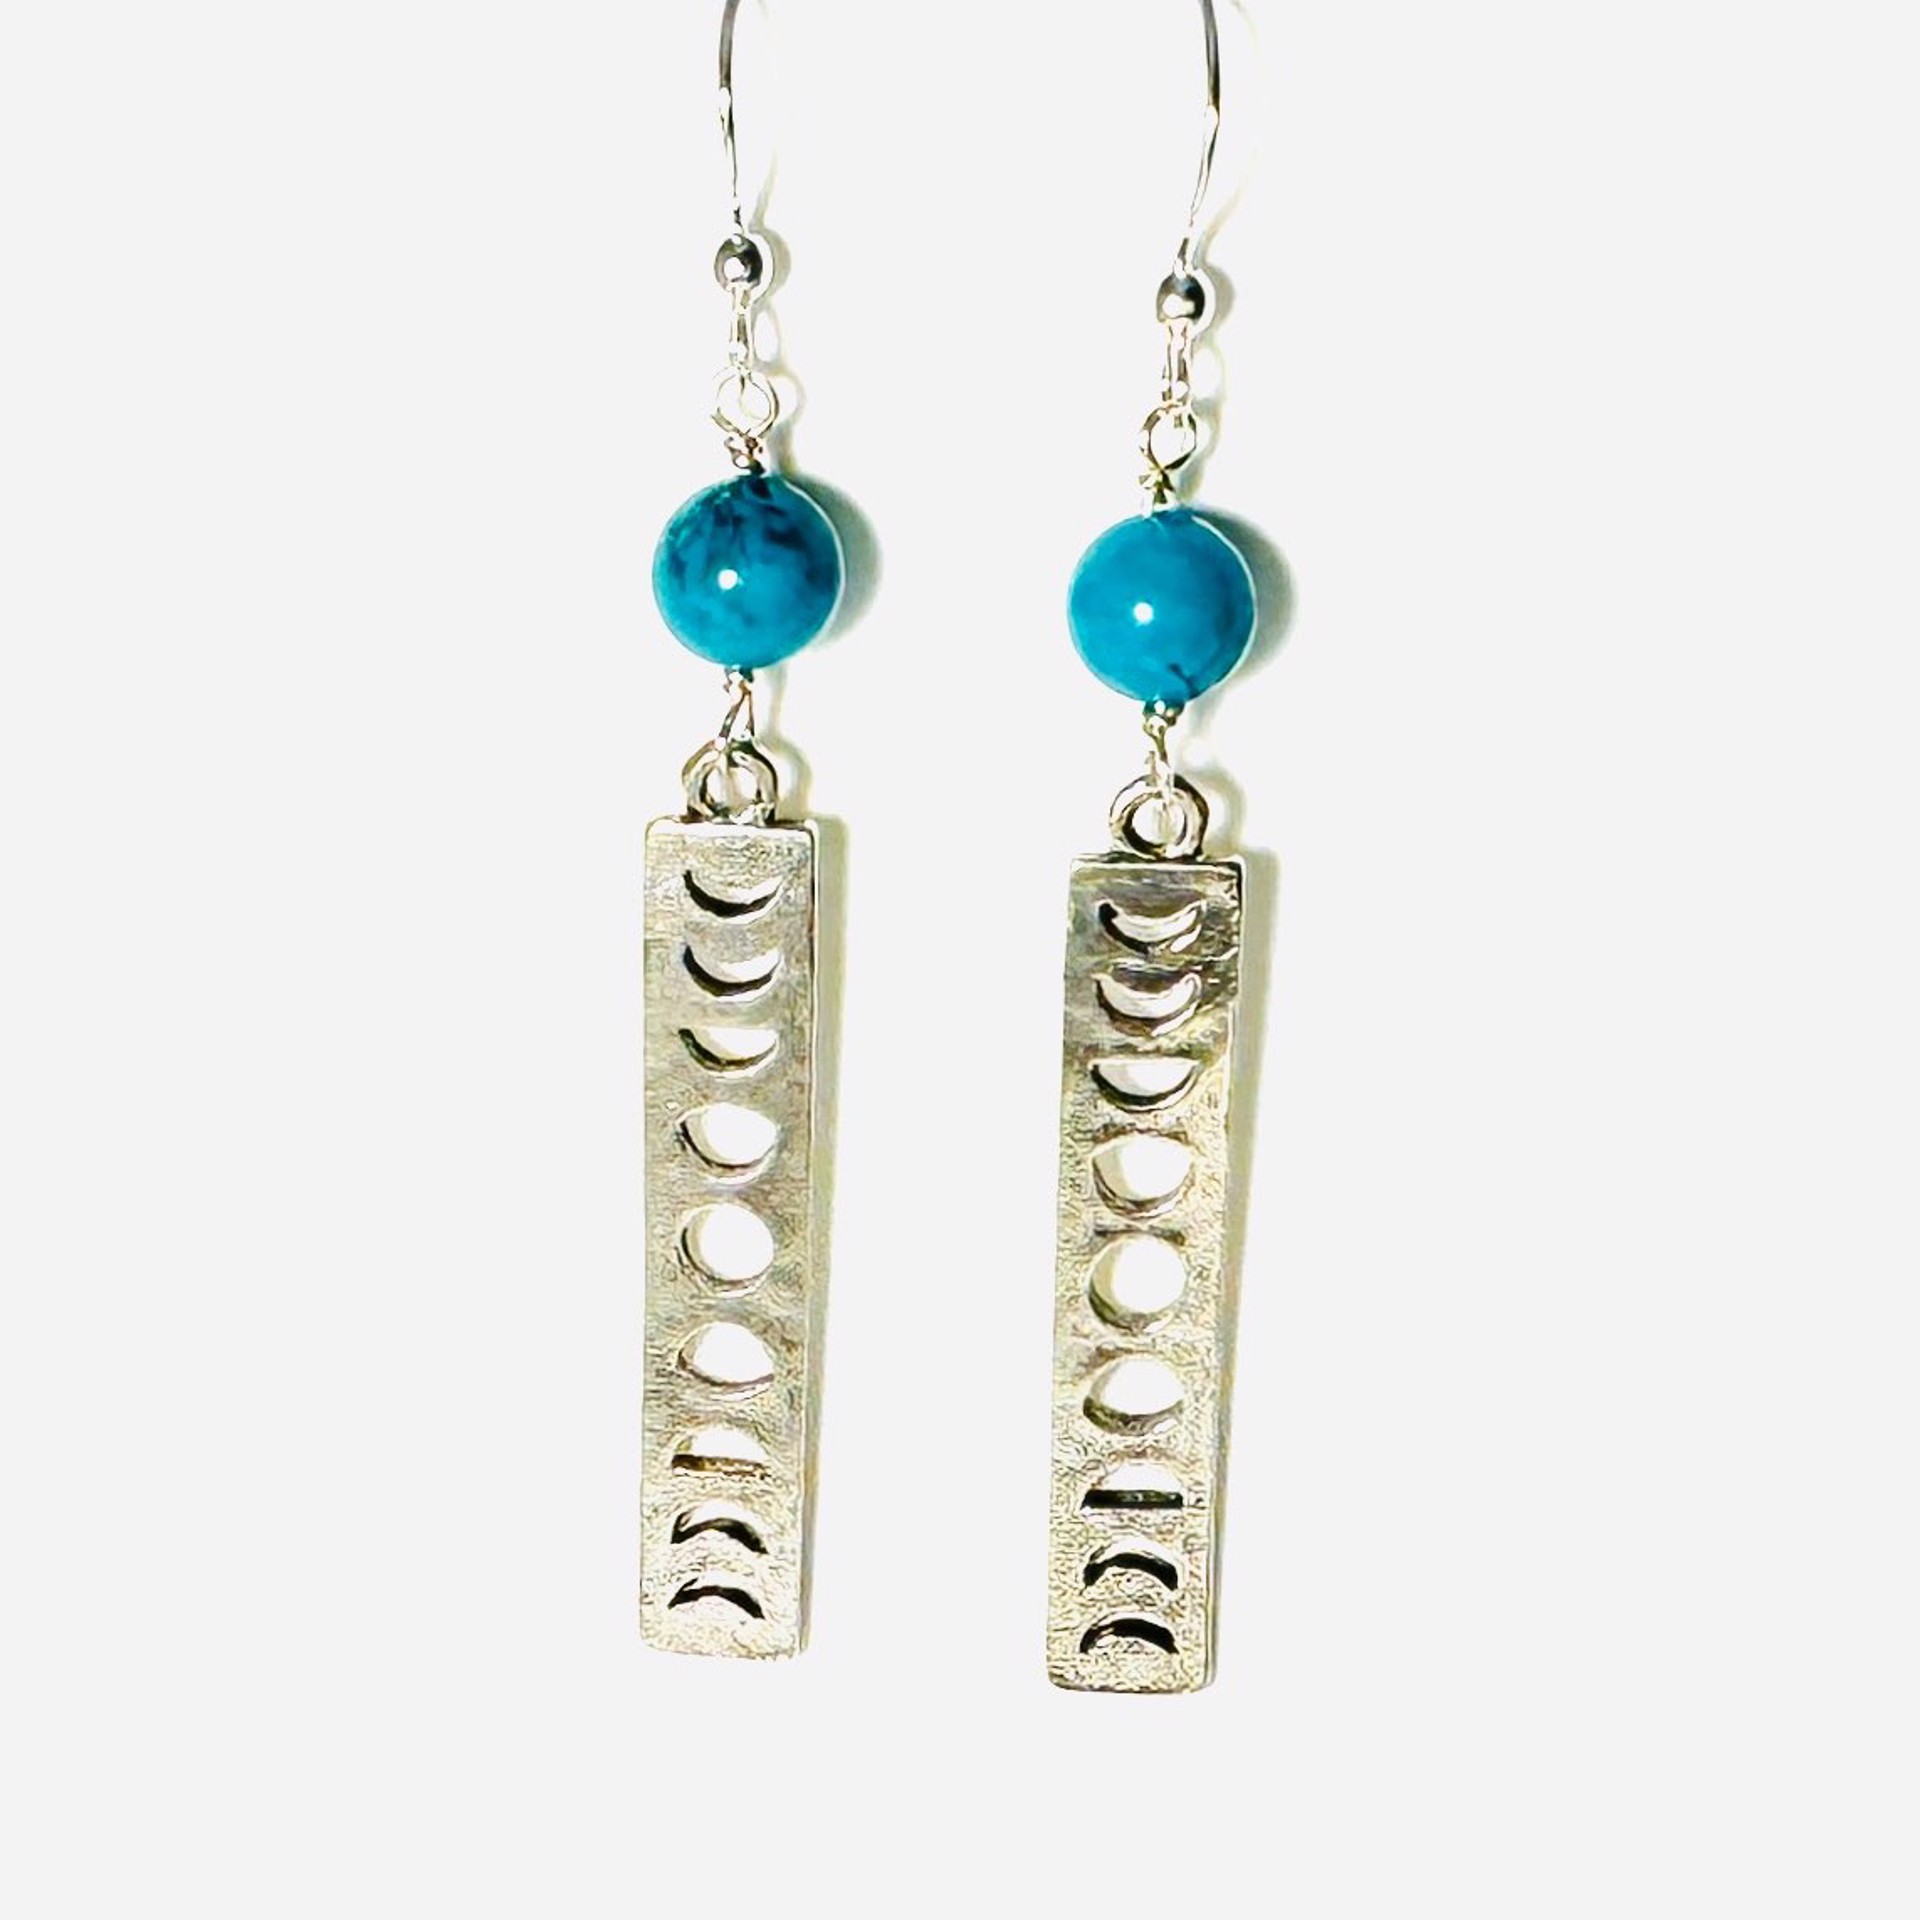 Turquoise Howlite, Phases on the Moon on SP Earrings LR24-24 by Legare Riano